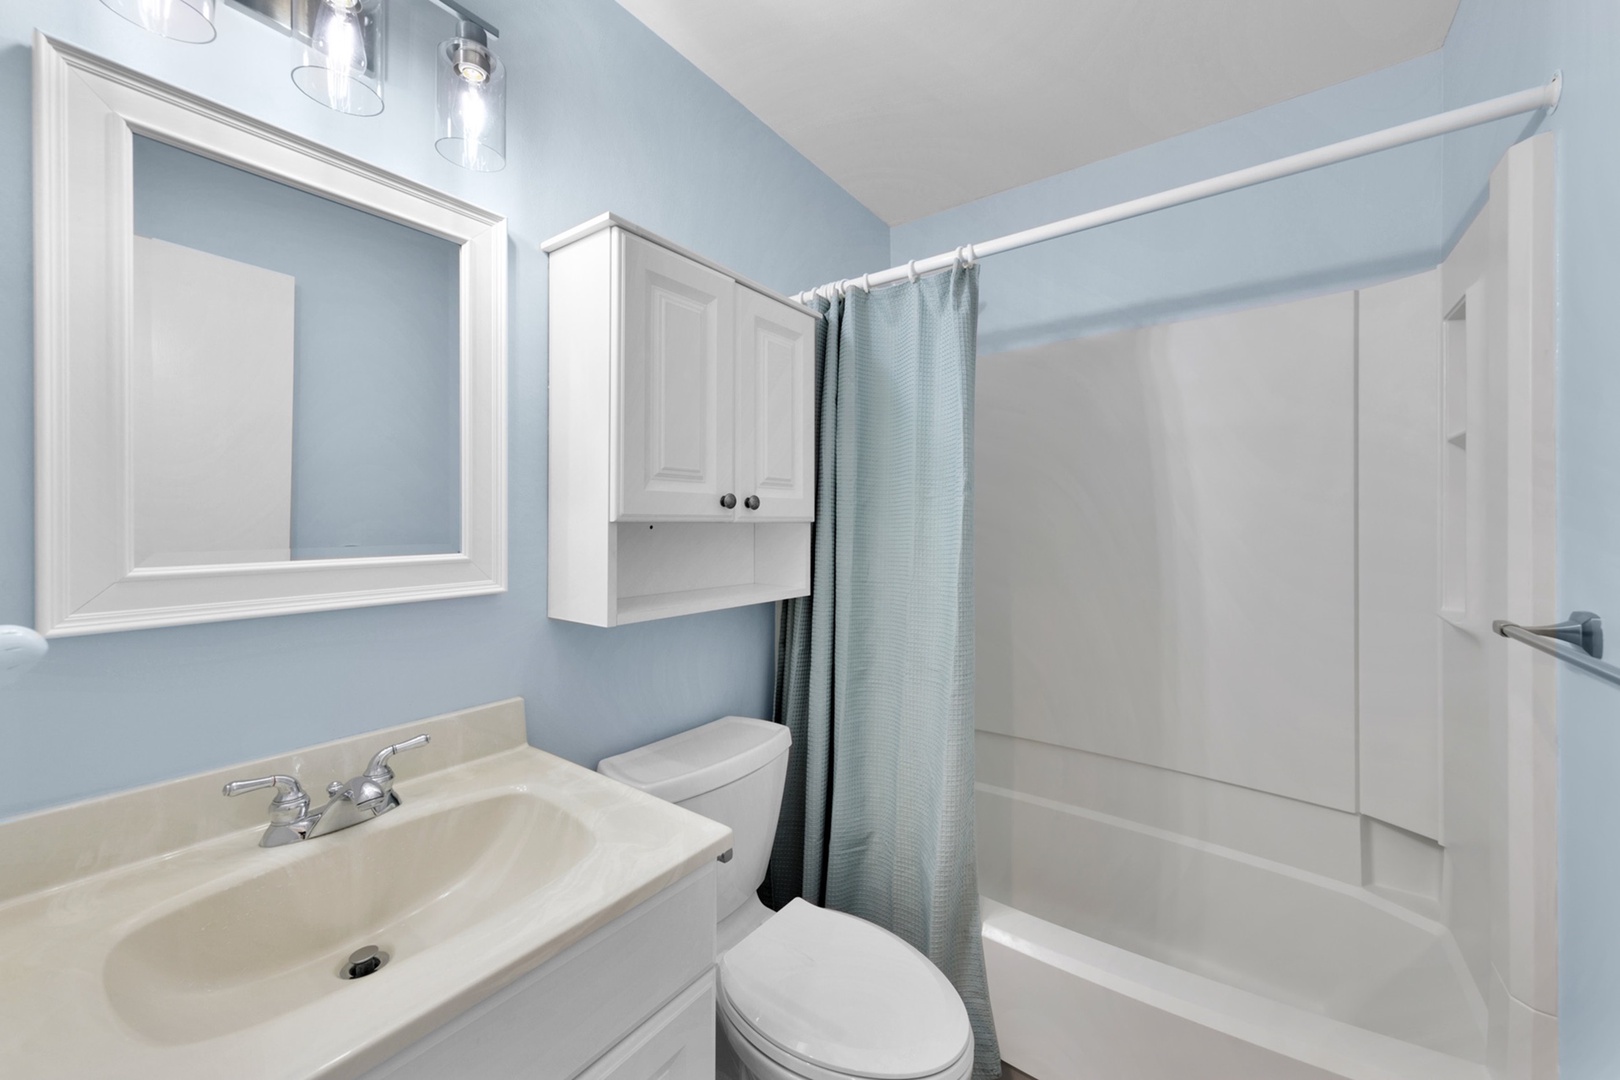 The second full bathroom offers a single vanity & shower/tub combo